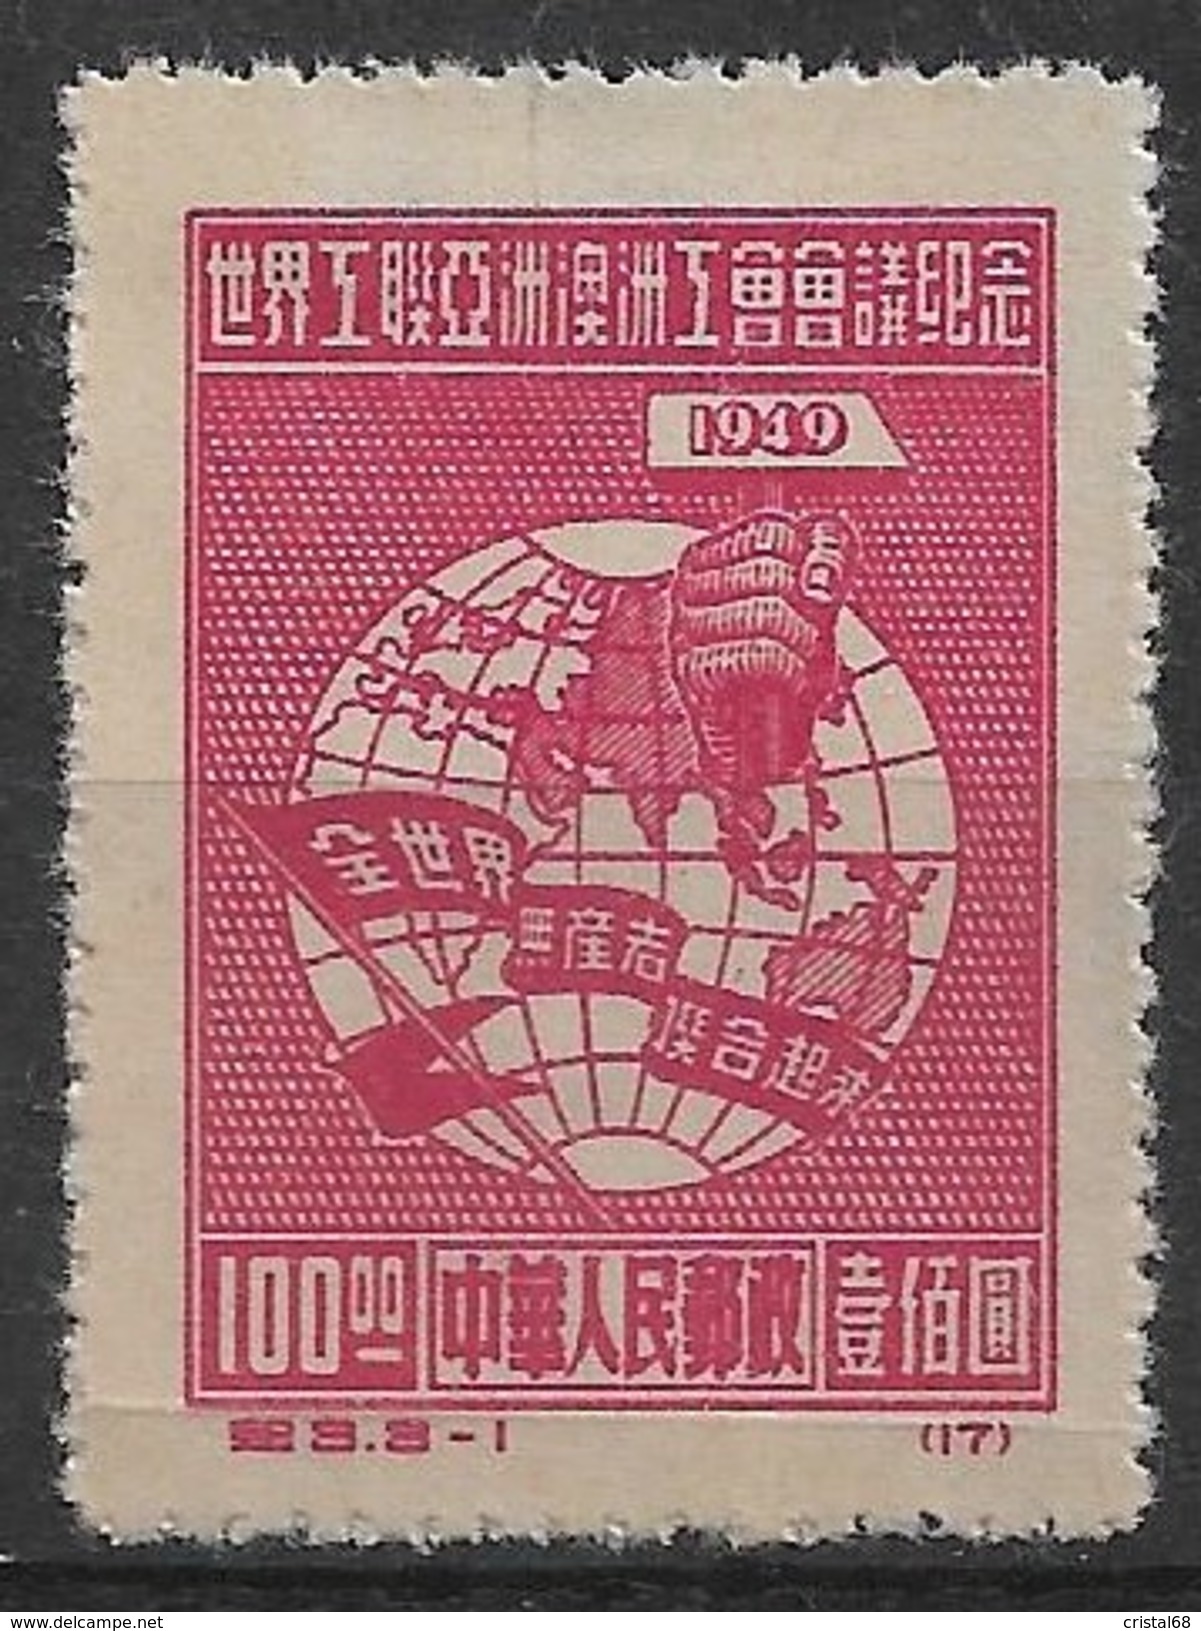 CHINE 1949 - Timbre N°824 - Neuf - Reimpresiones Oficiales